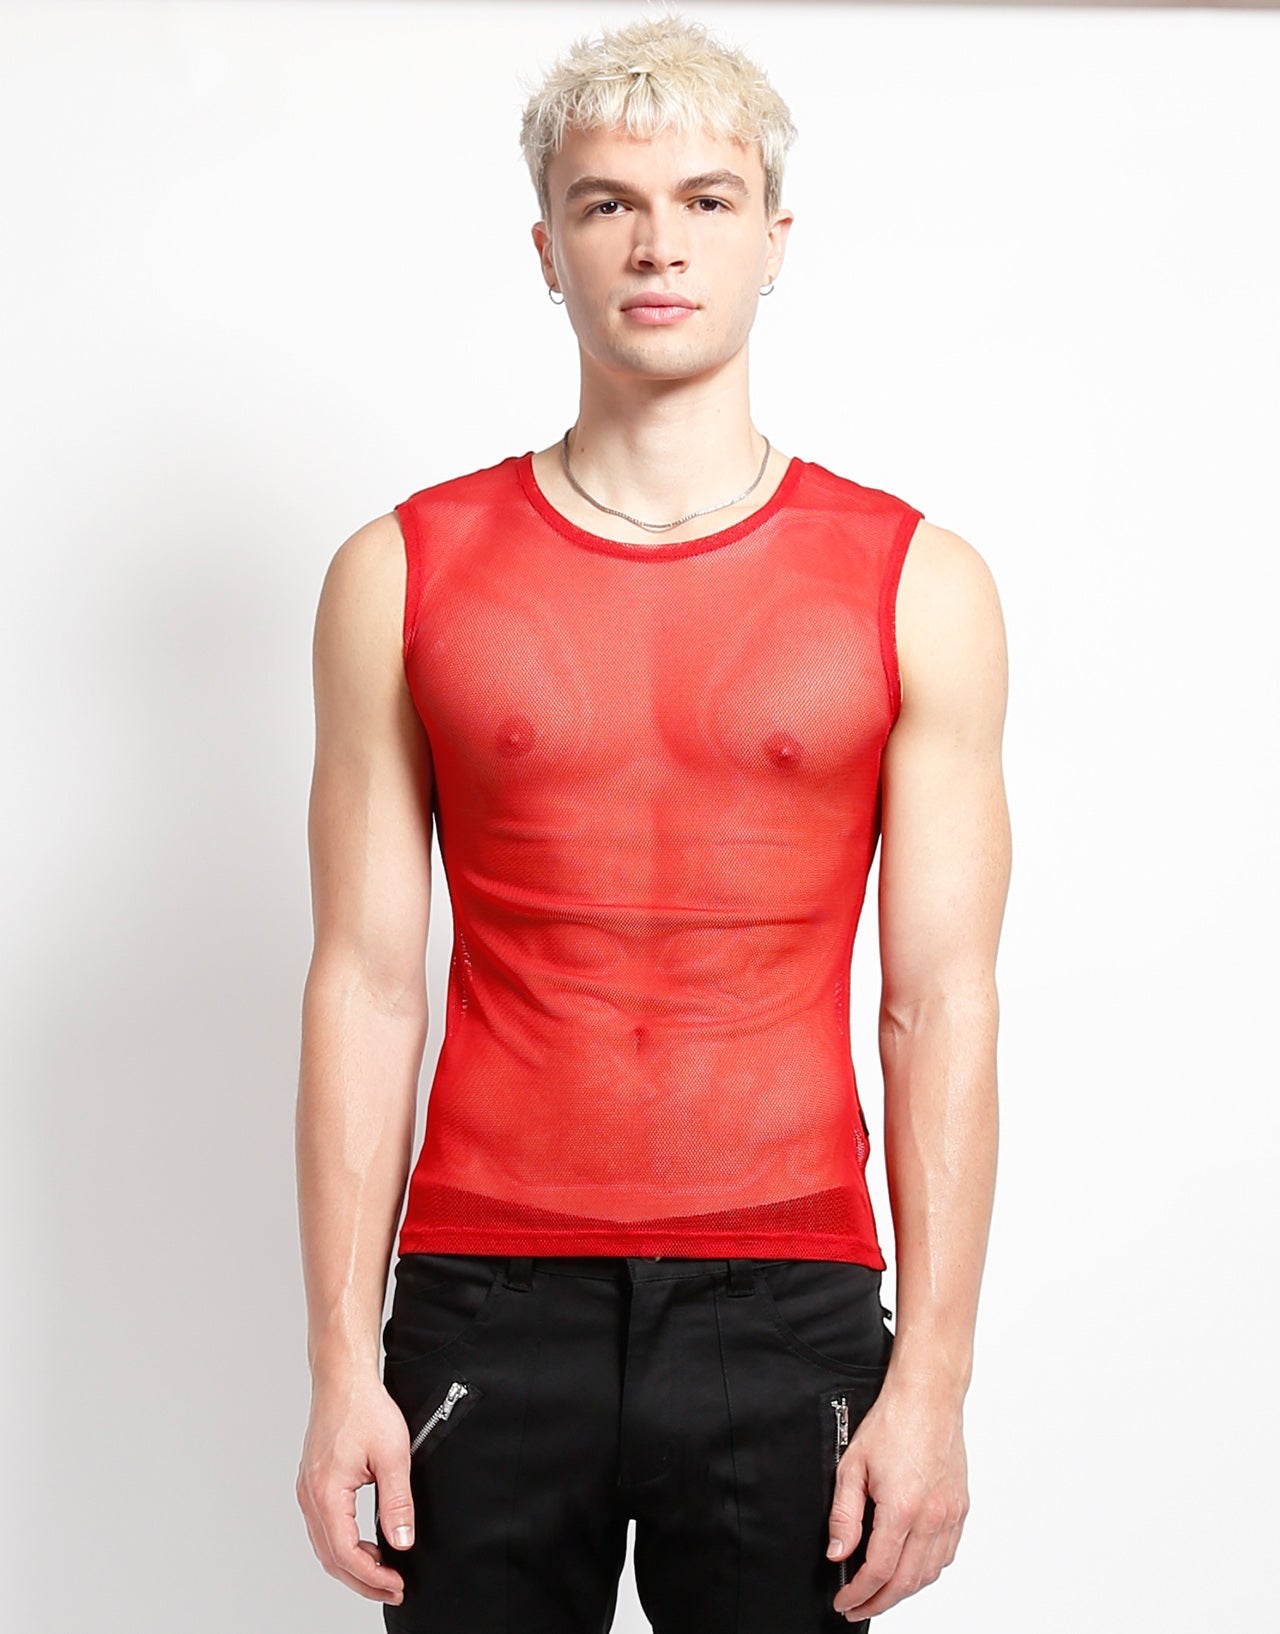 The red Sleeveless Fishnet Muscle Tank on a model wearing black pants, front view.